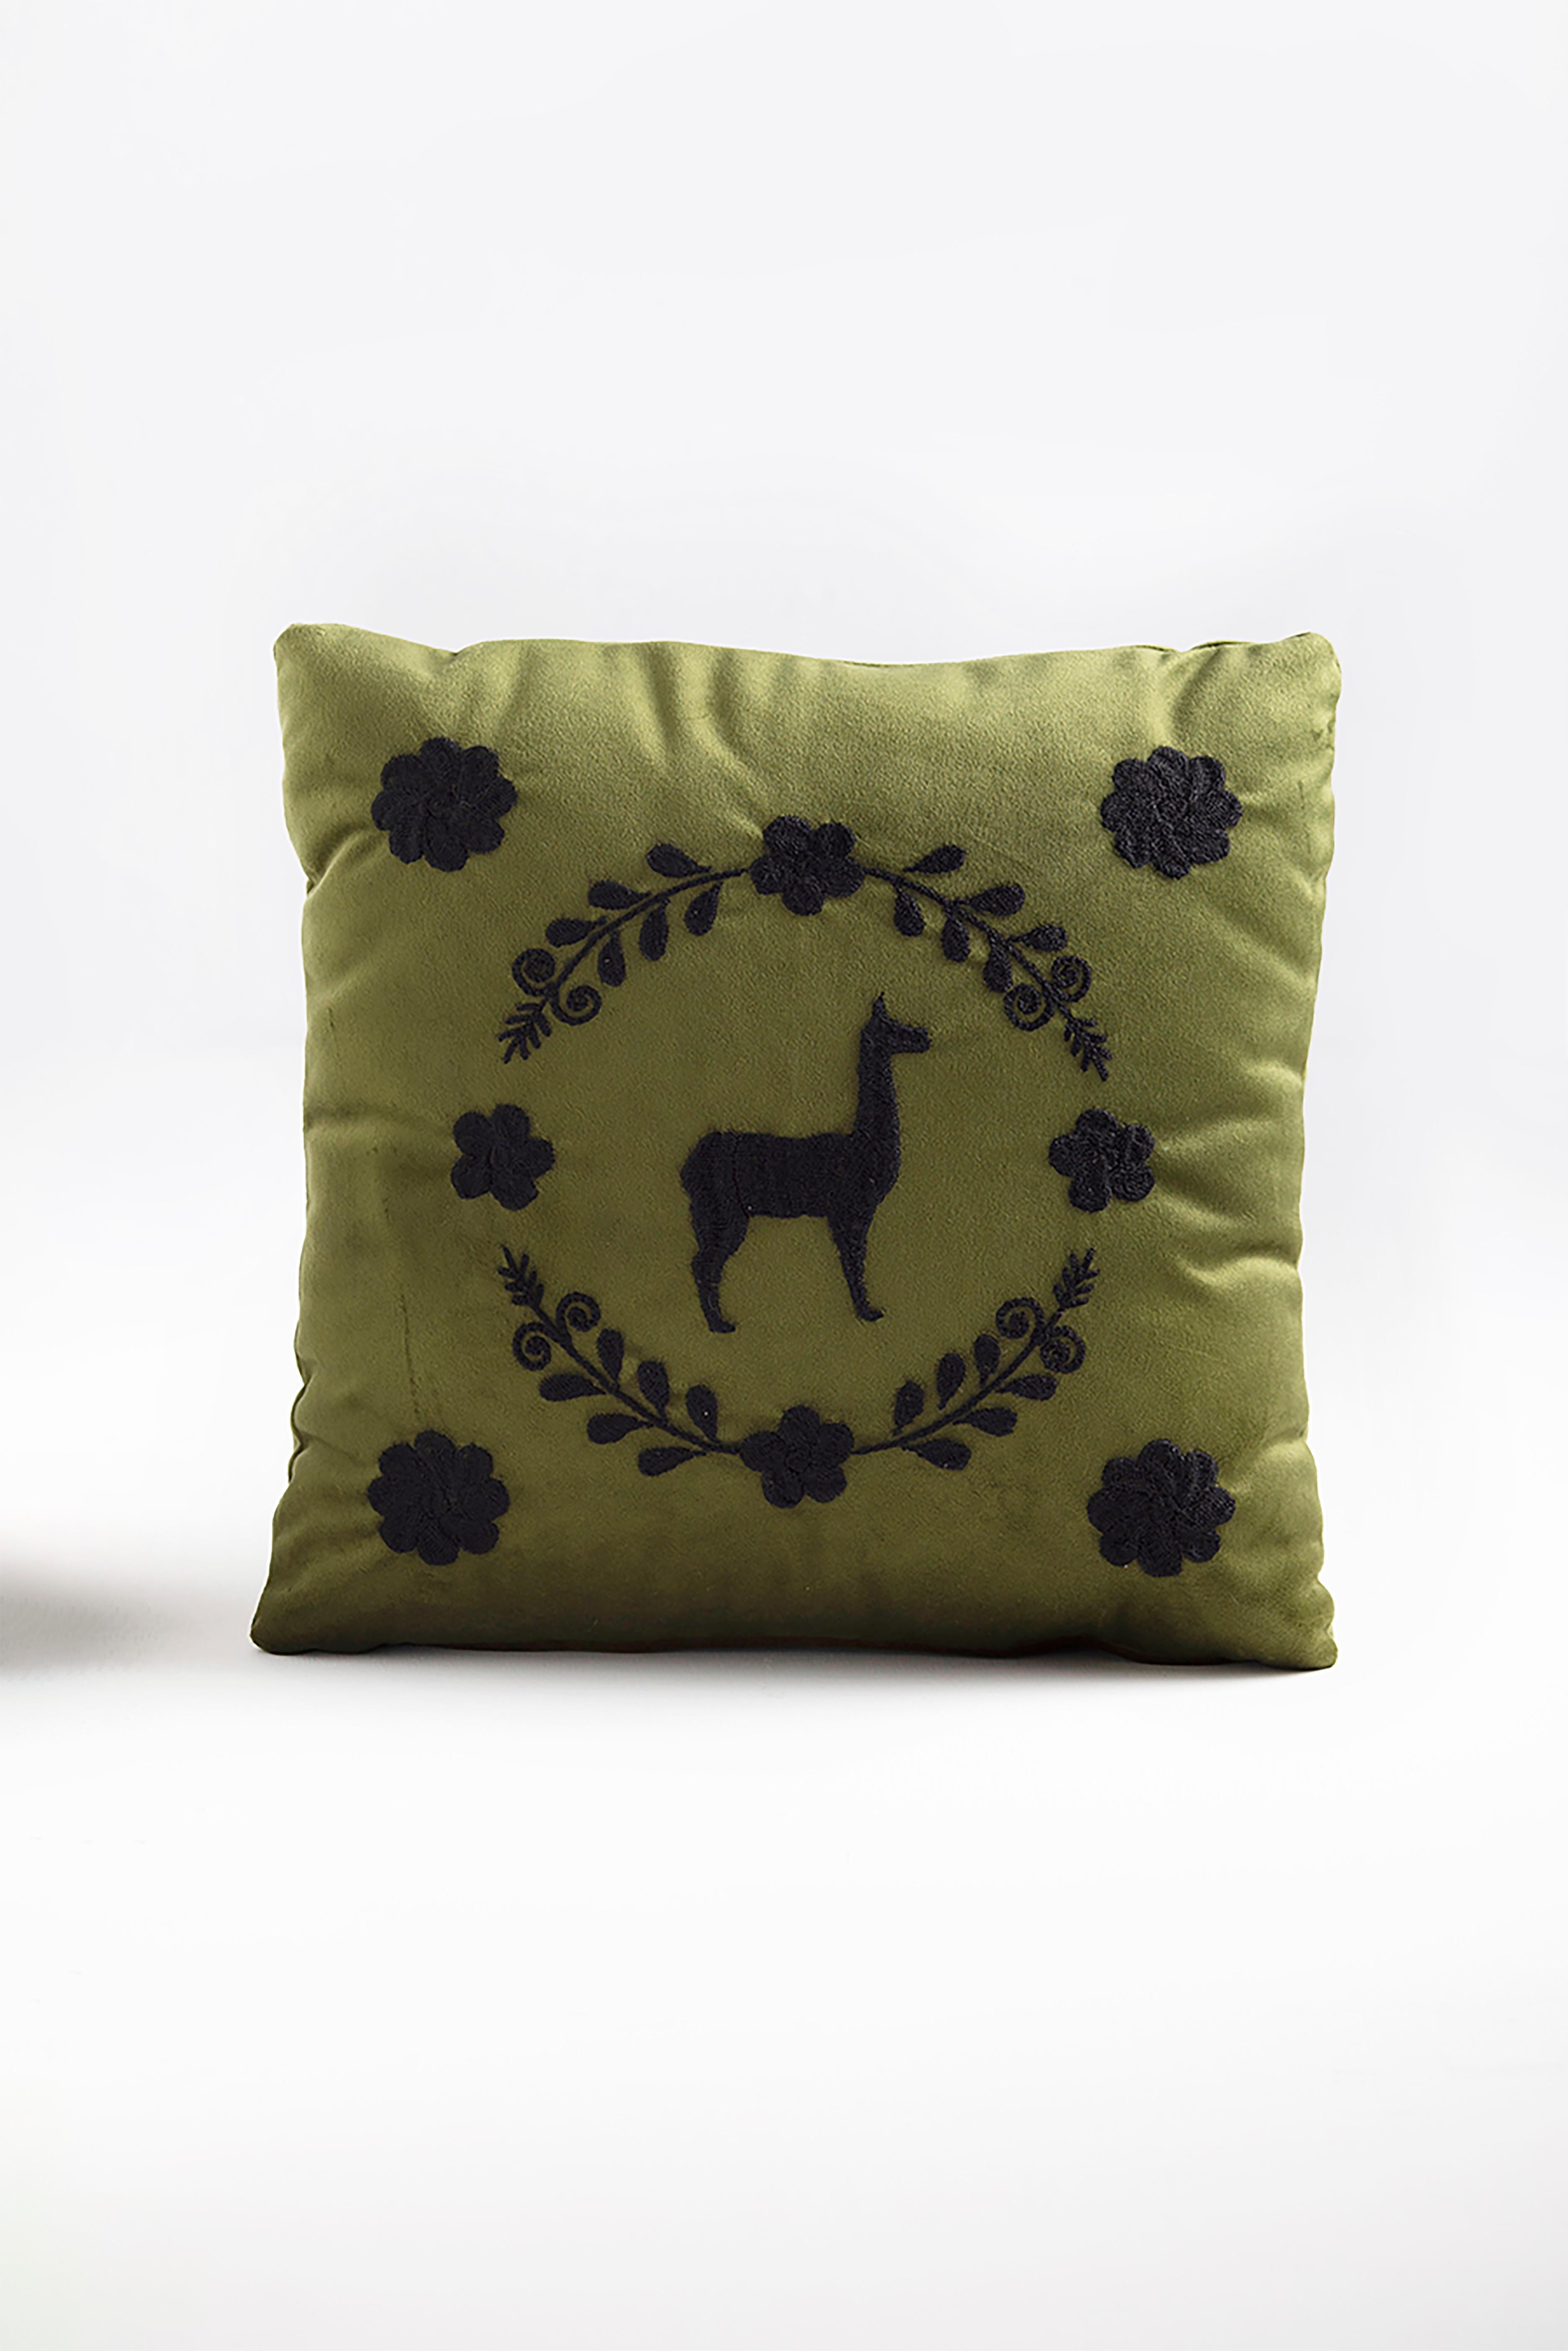 Decorative pillows with hand-embroidered llama motif from Zuleta, Imbabura, and waterproof velvet or upholstery fabric.

These decorative cushions are carefully hand-crafted with cotton embroidery and enriched with accents of sheep fur and leather.